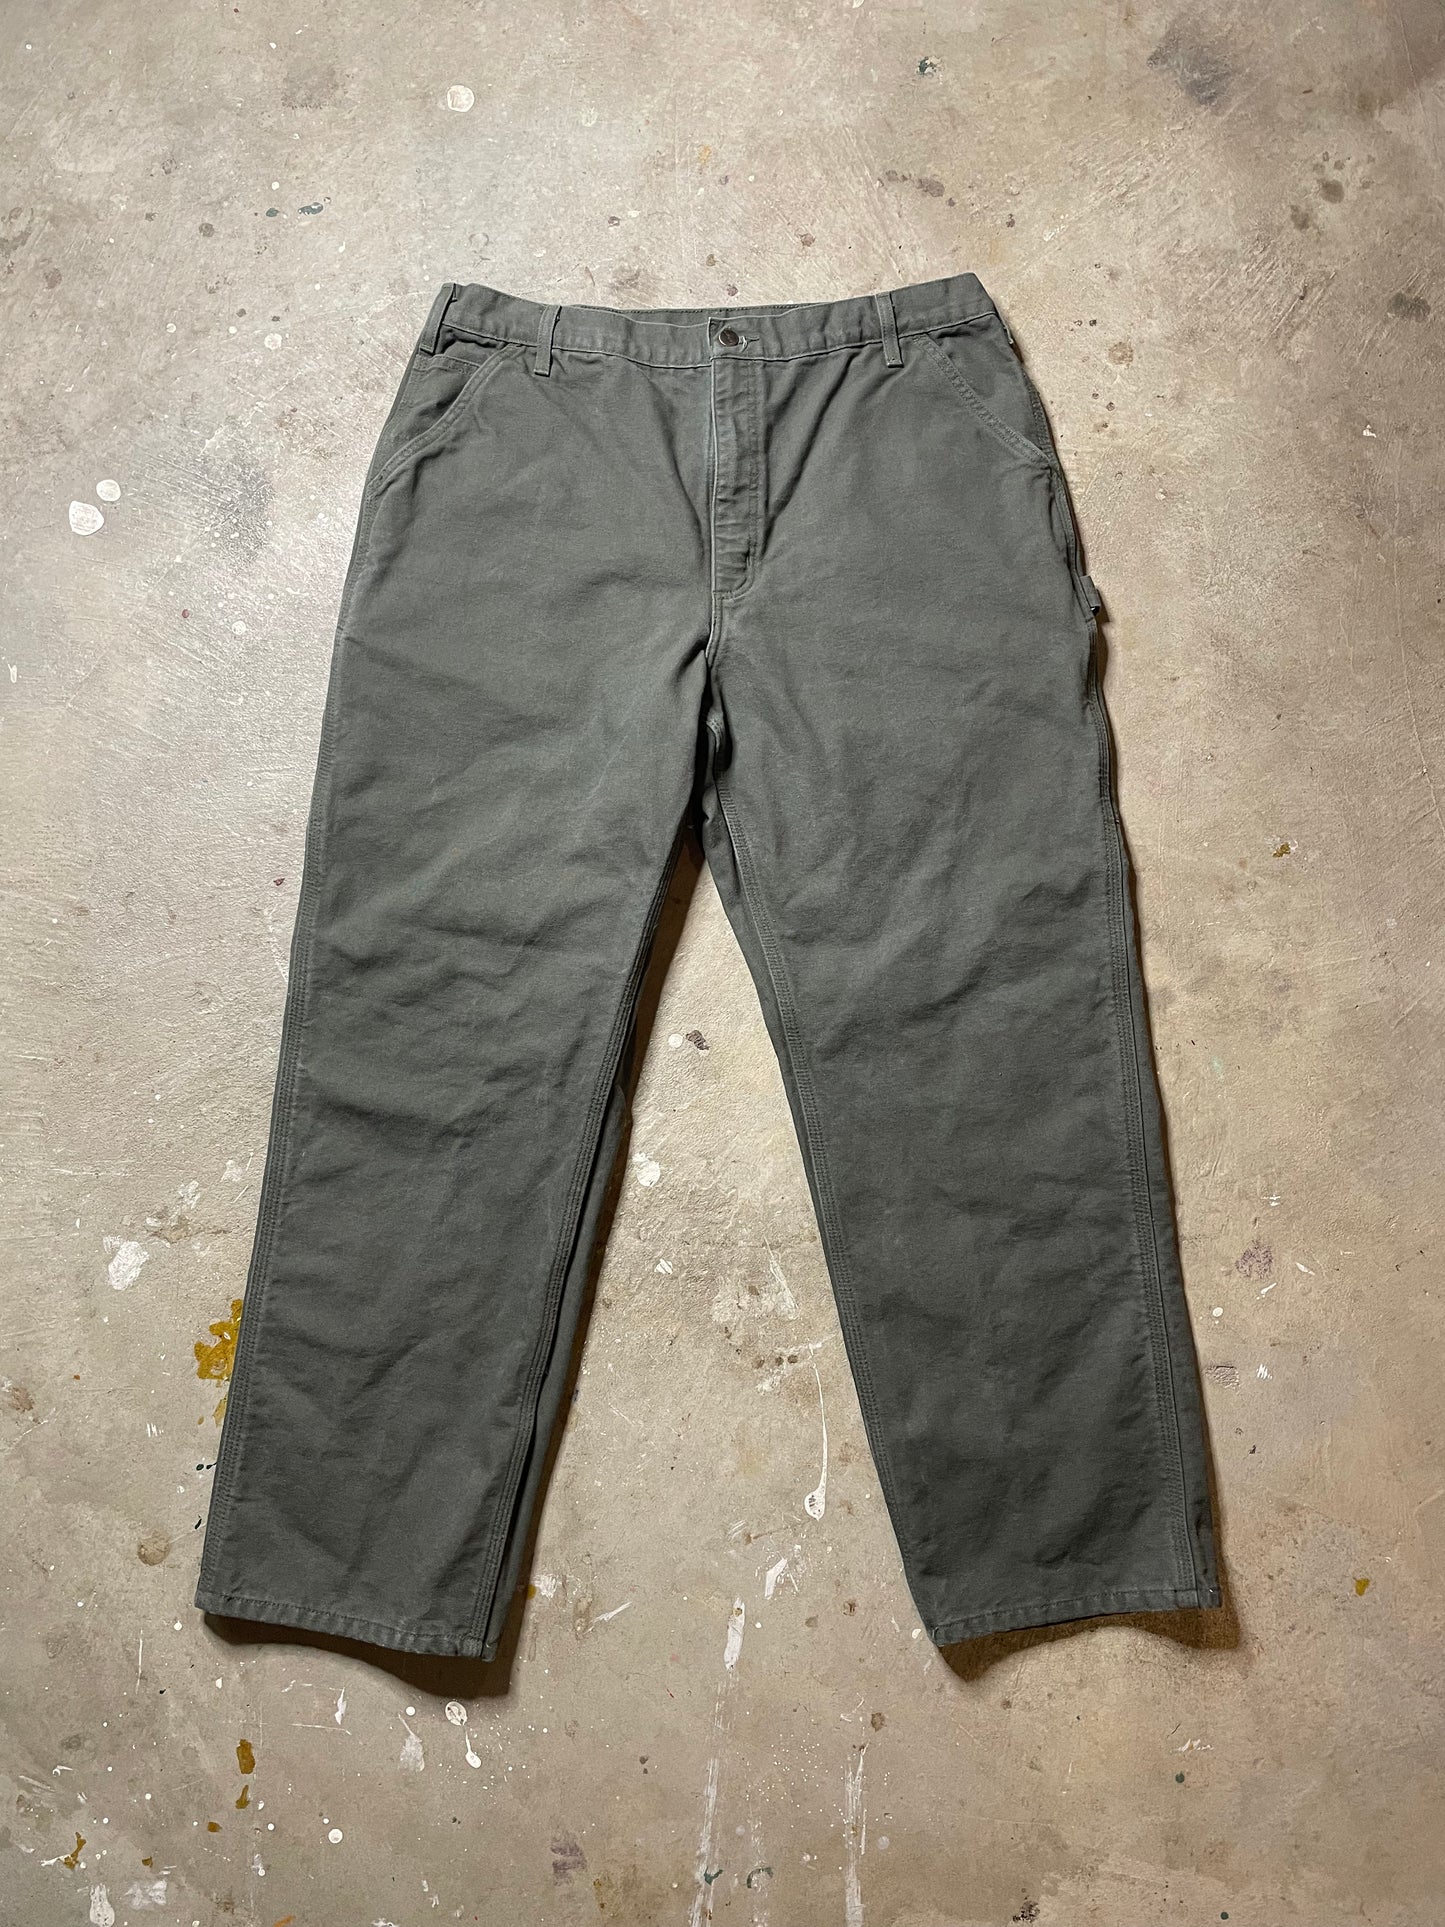 Carhartt Flannel Lined Duck Pant